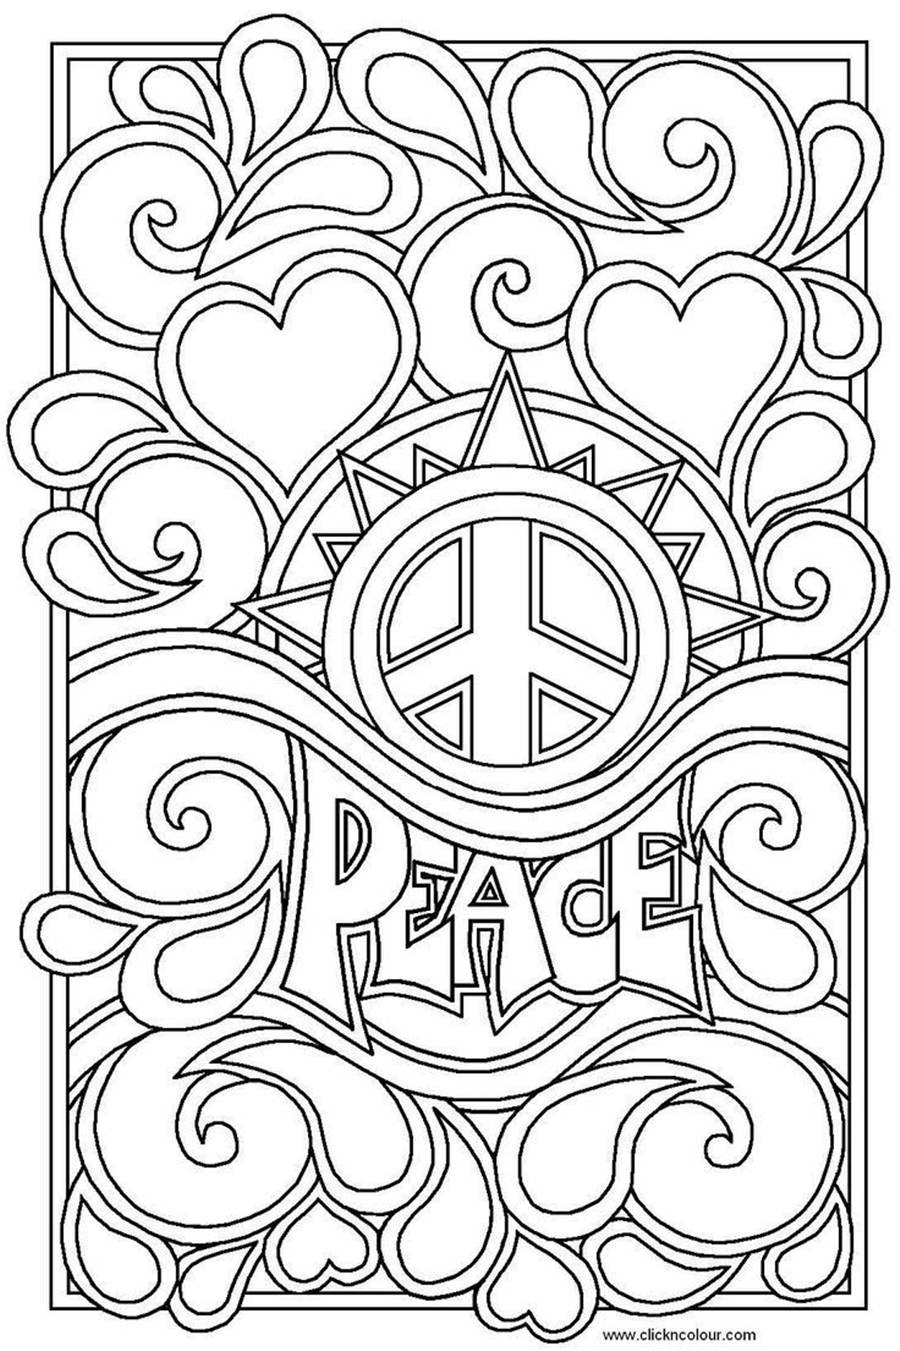 Free Kids Respect Coloring Pages Elegant Easy Drawings - Kidcolorings - Free Printable Coloring Pages On Respect